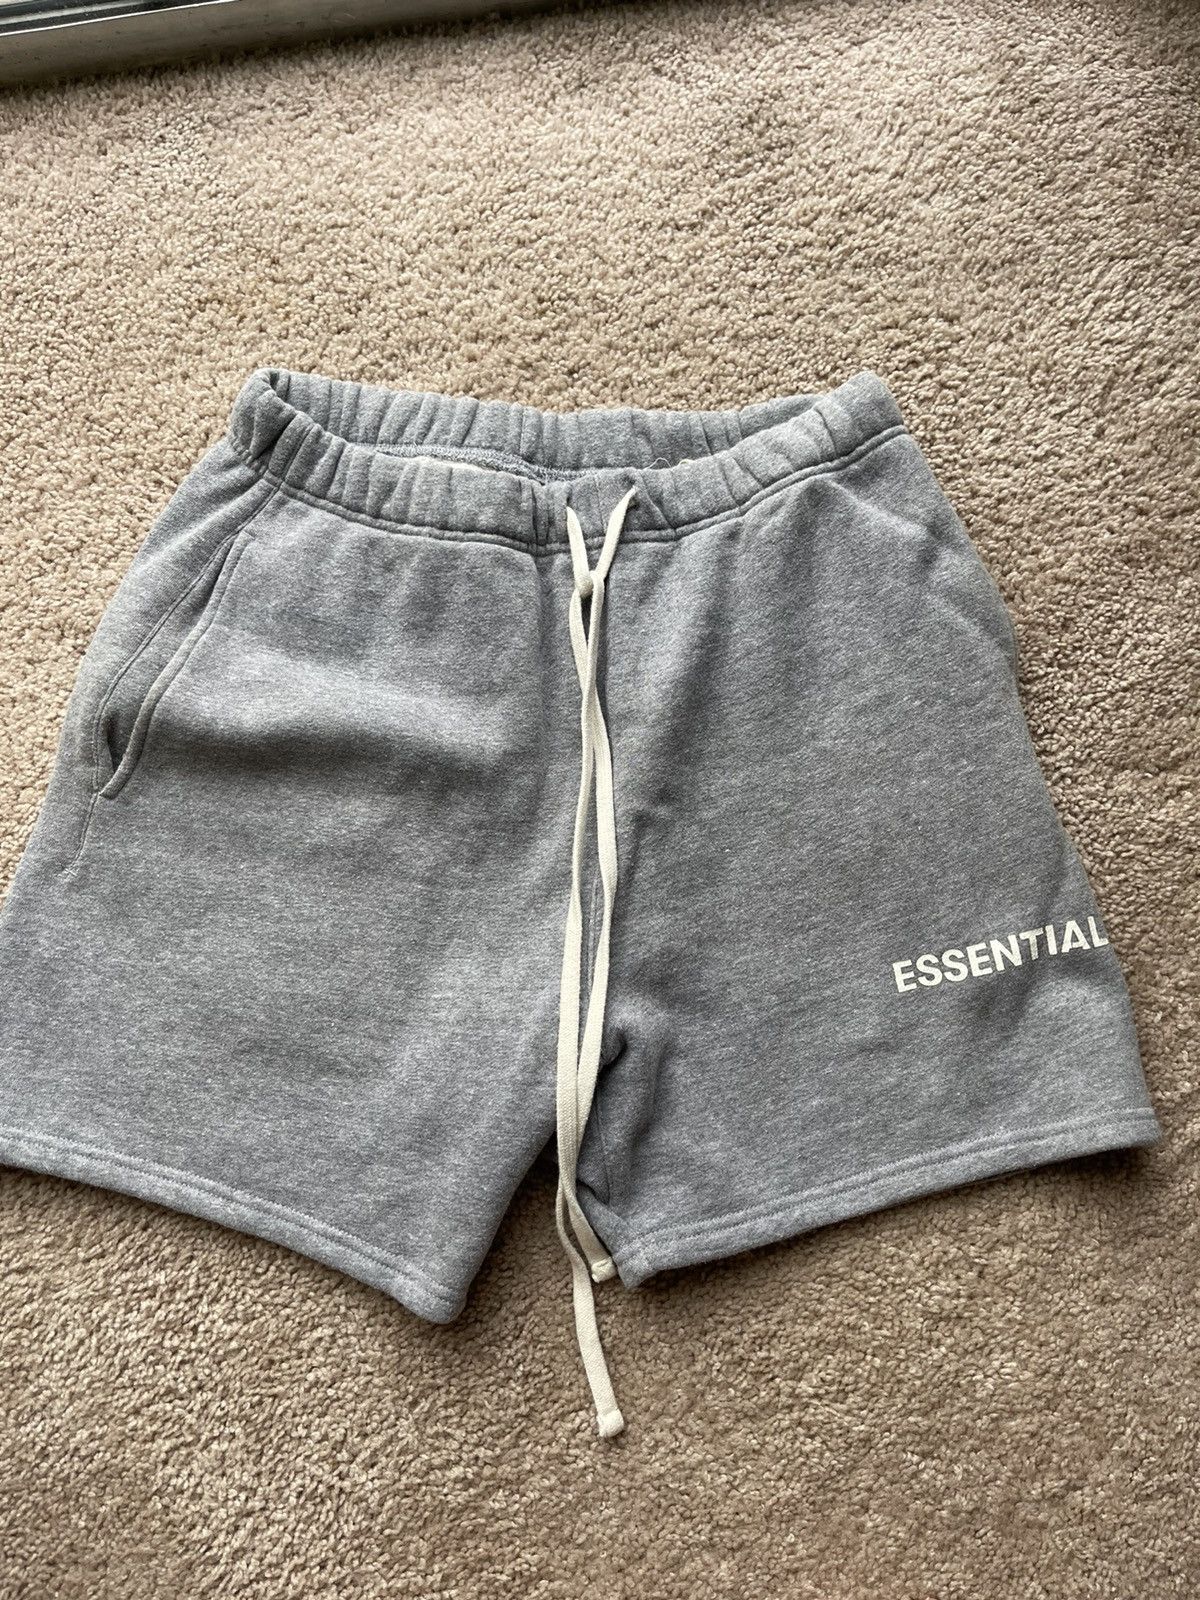 Pre-owned Essentials X Fear Of God Essentials Grey Shorts Size S